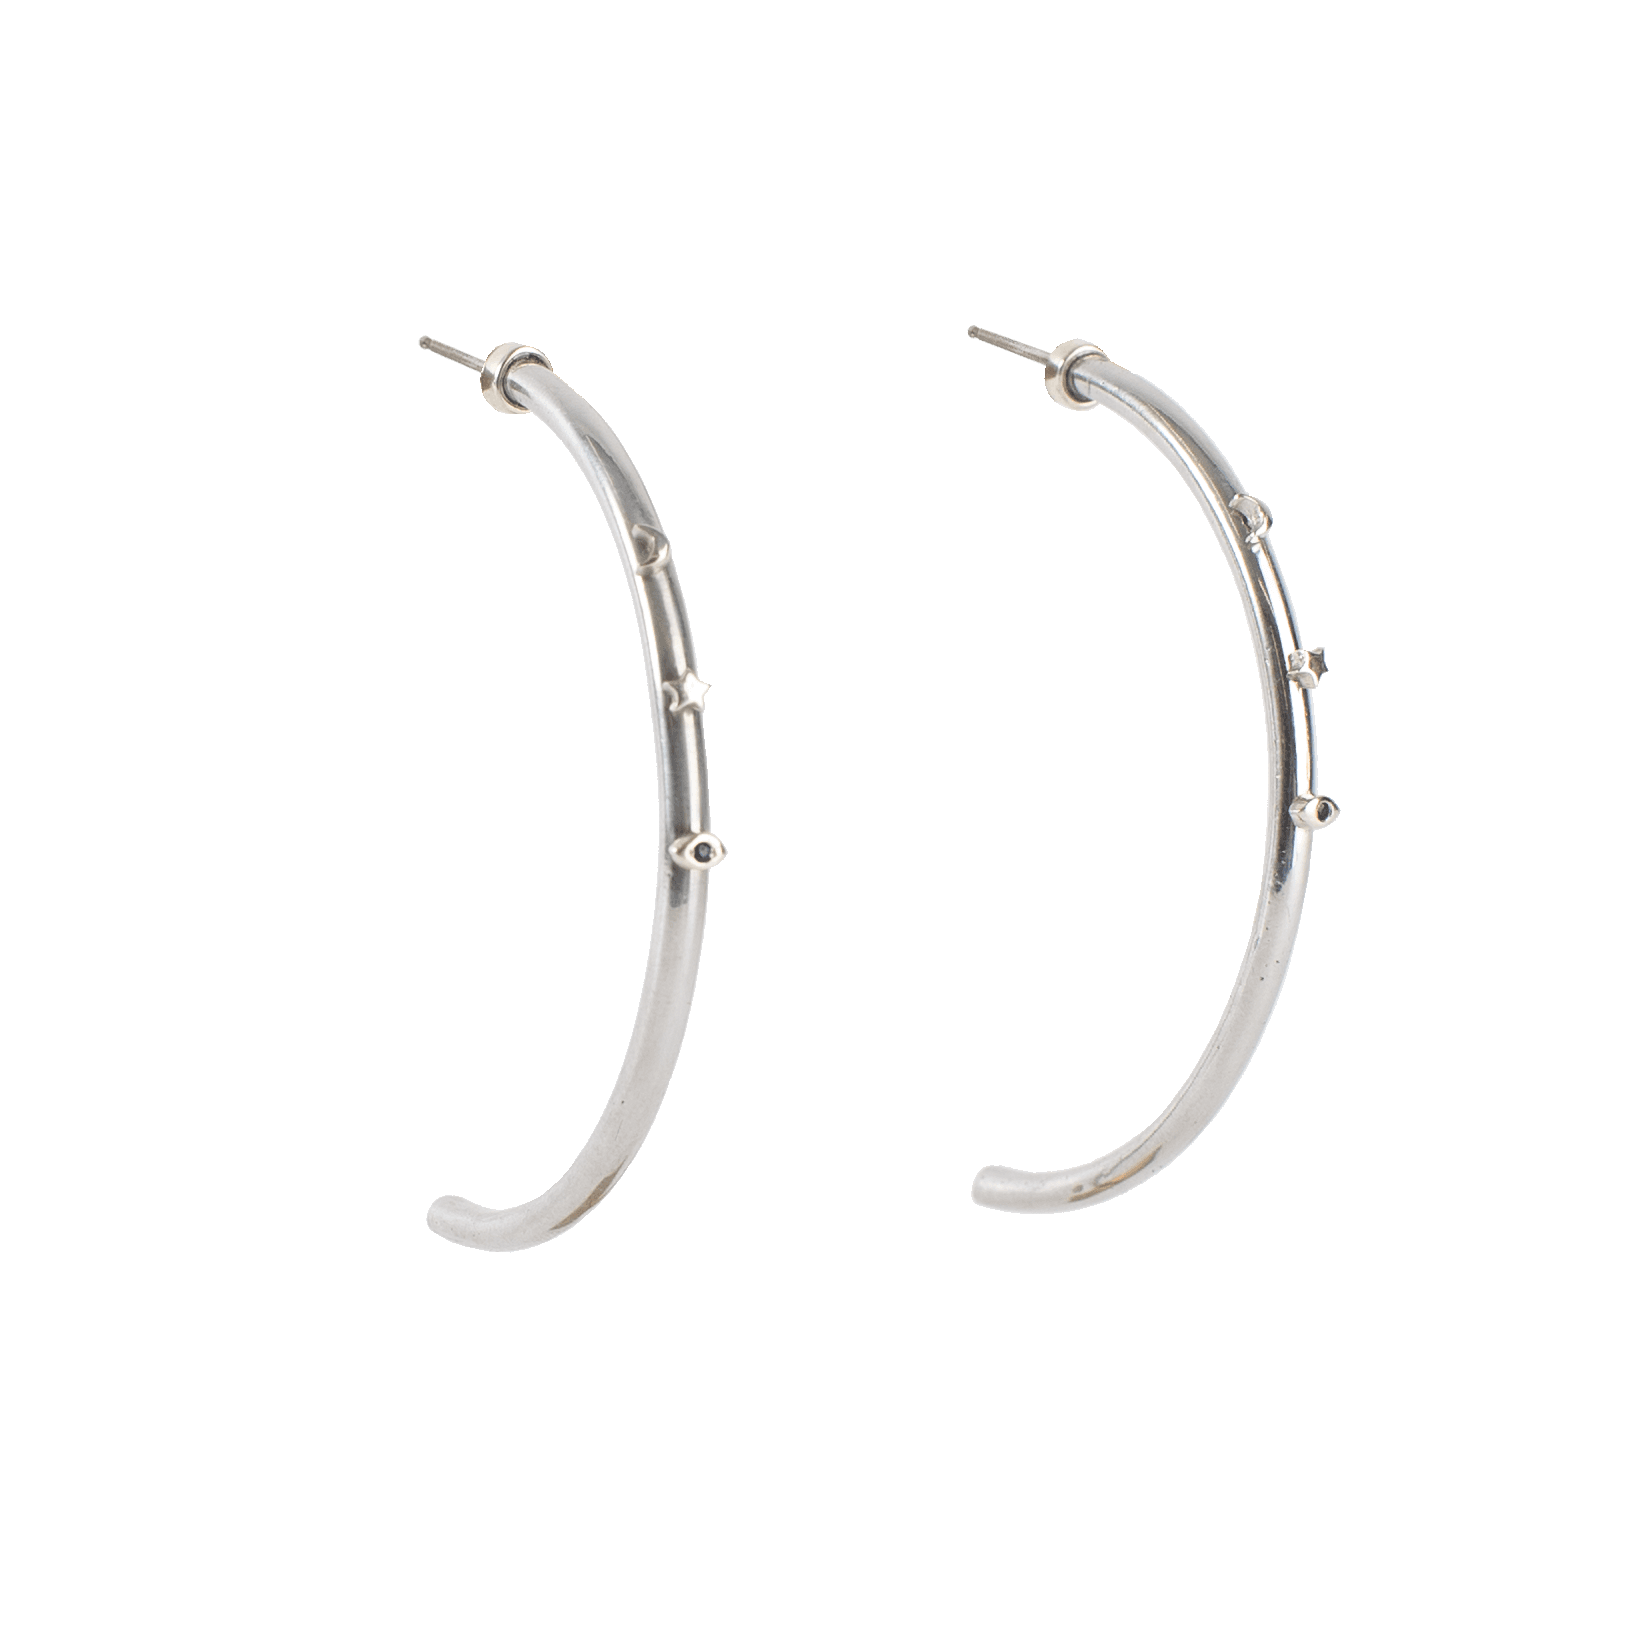 NEW COSMOS MOON, STAR, SAPPHIRE EYE Hoop Earringscategory_Accessories from ARTICLE22 - SHOPELEOS